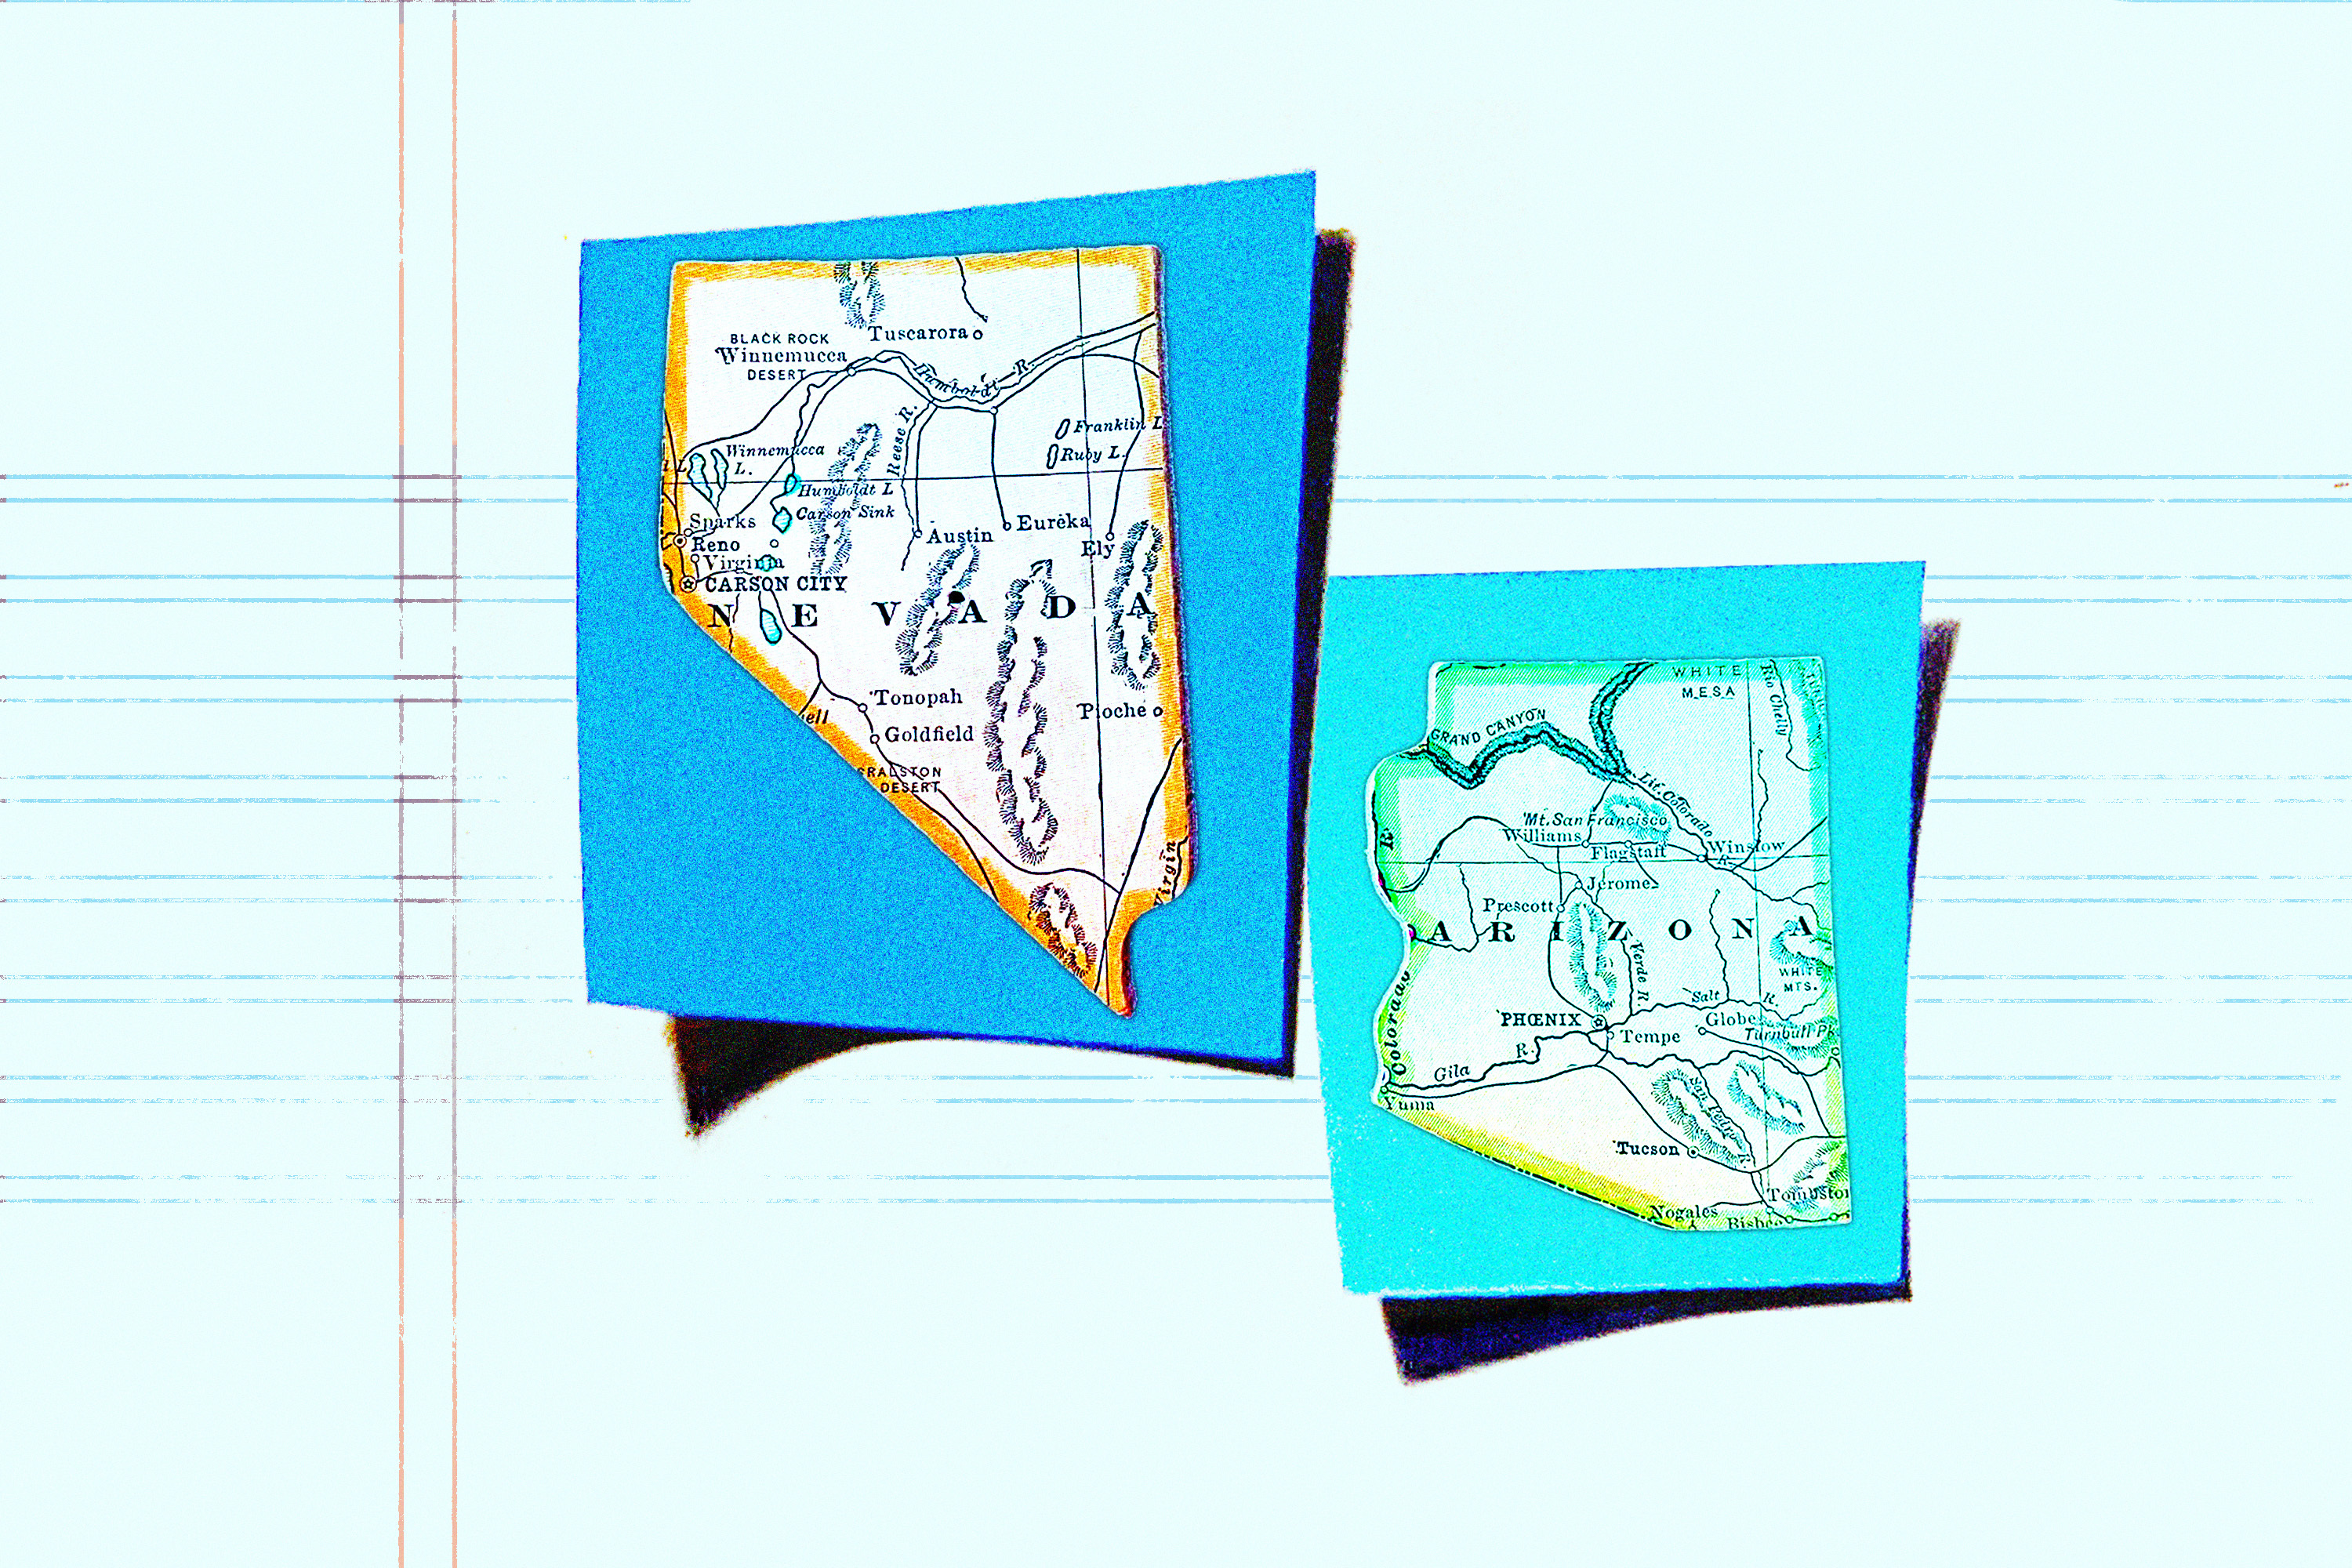 An illustration shows maps of Nevada and Arizona on blue pieces of paper.